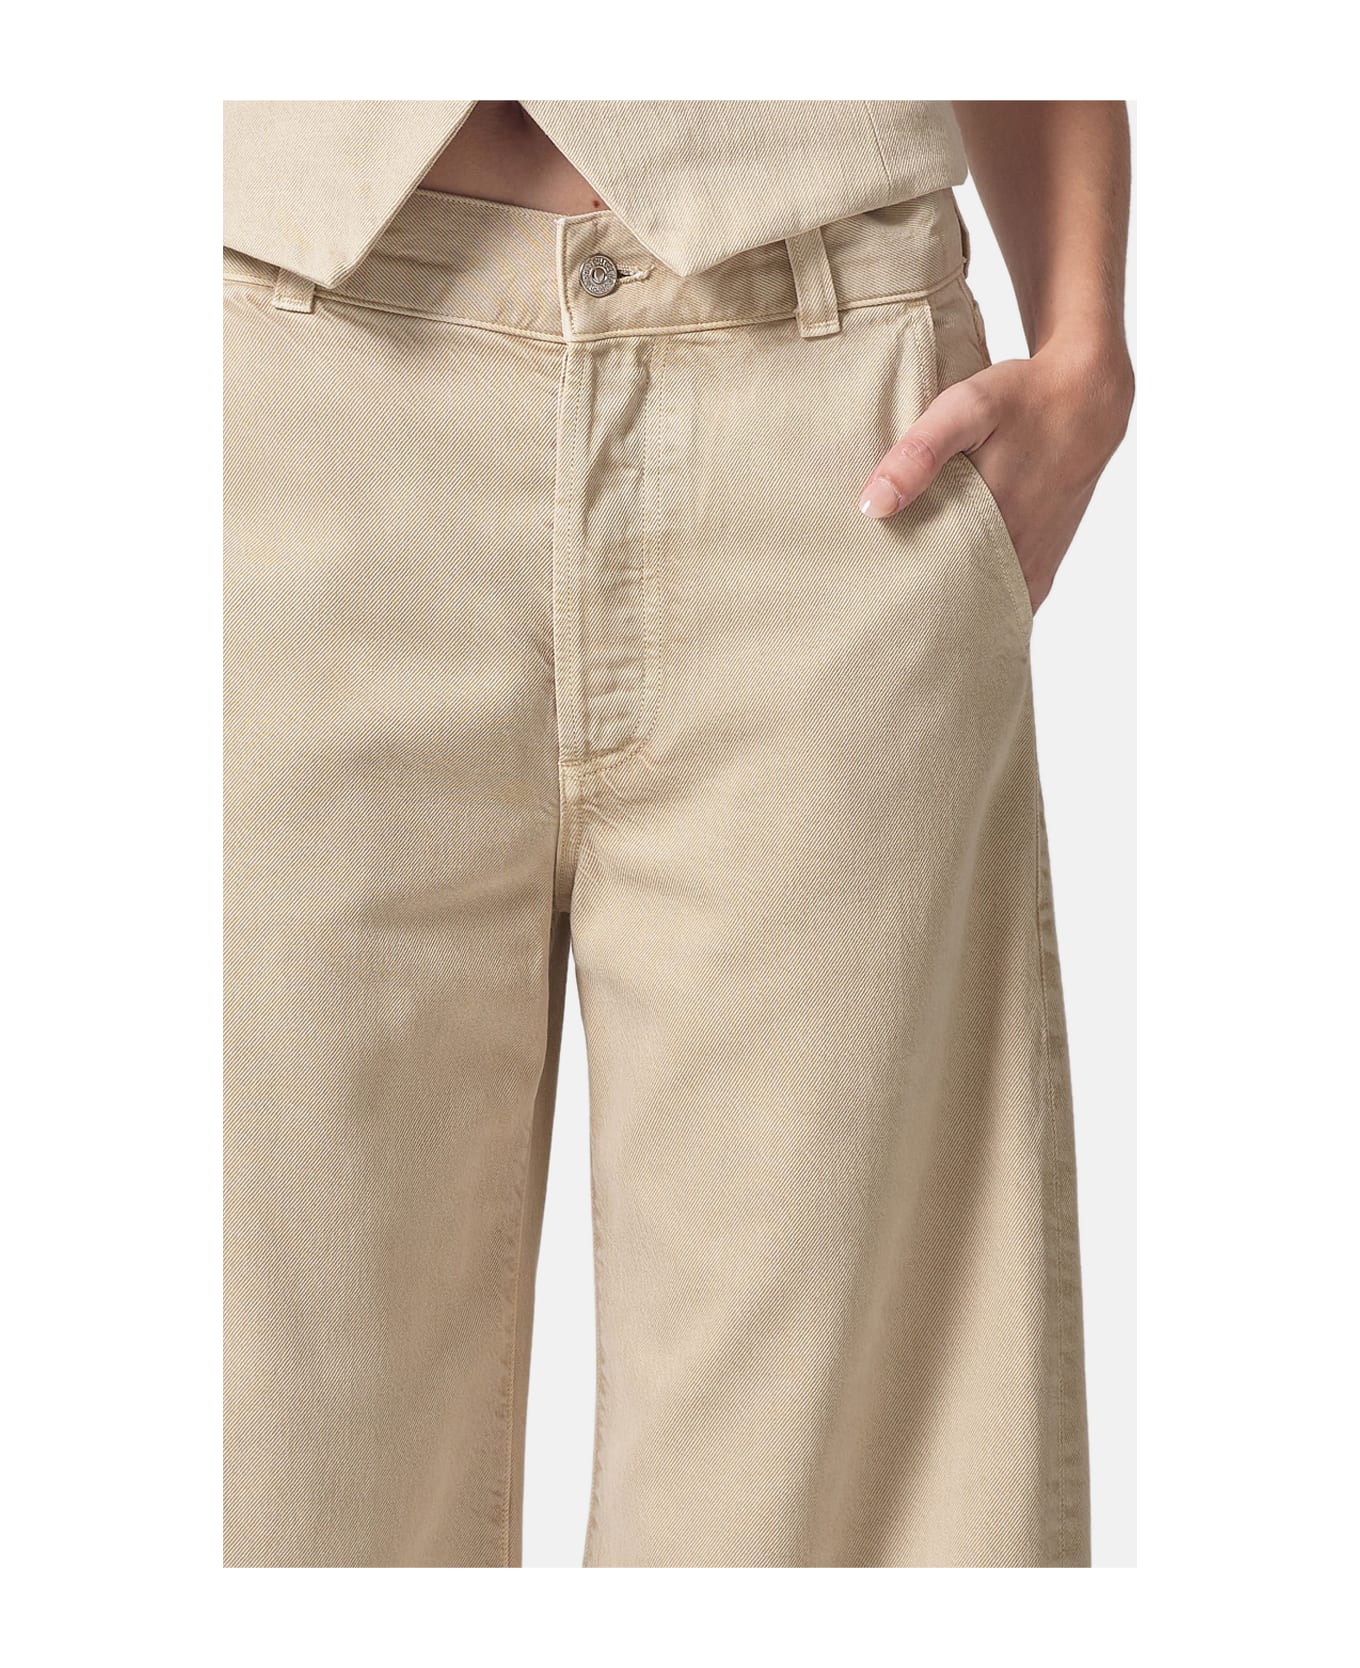 Citizens of Humanity Beverly Denim Pants - Beige